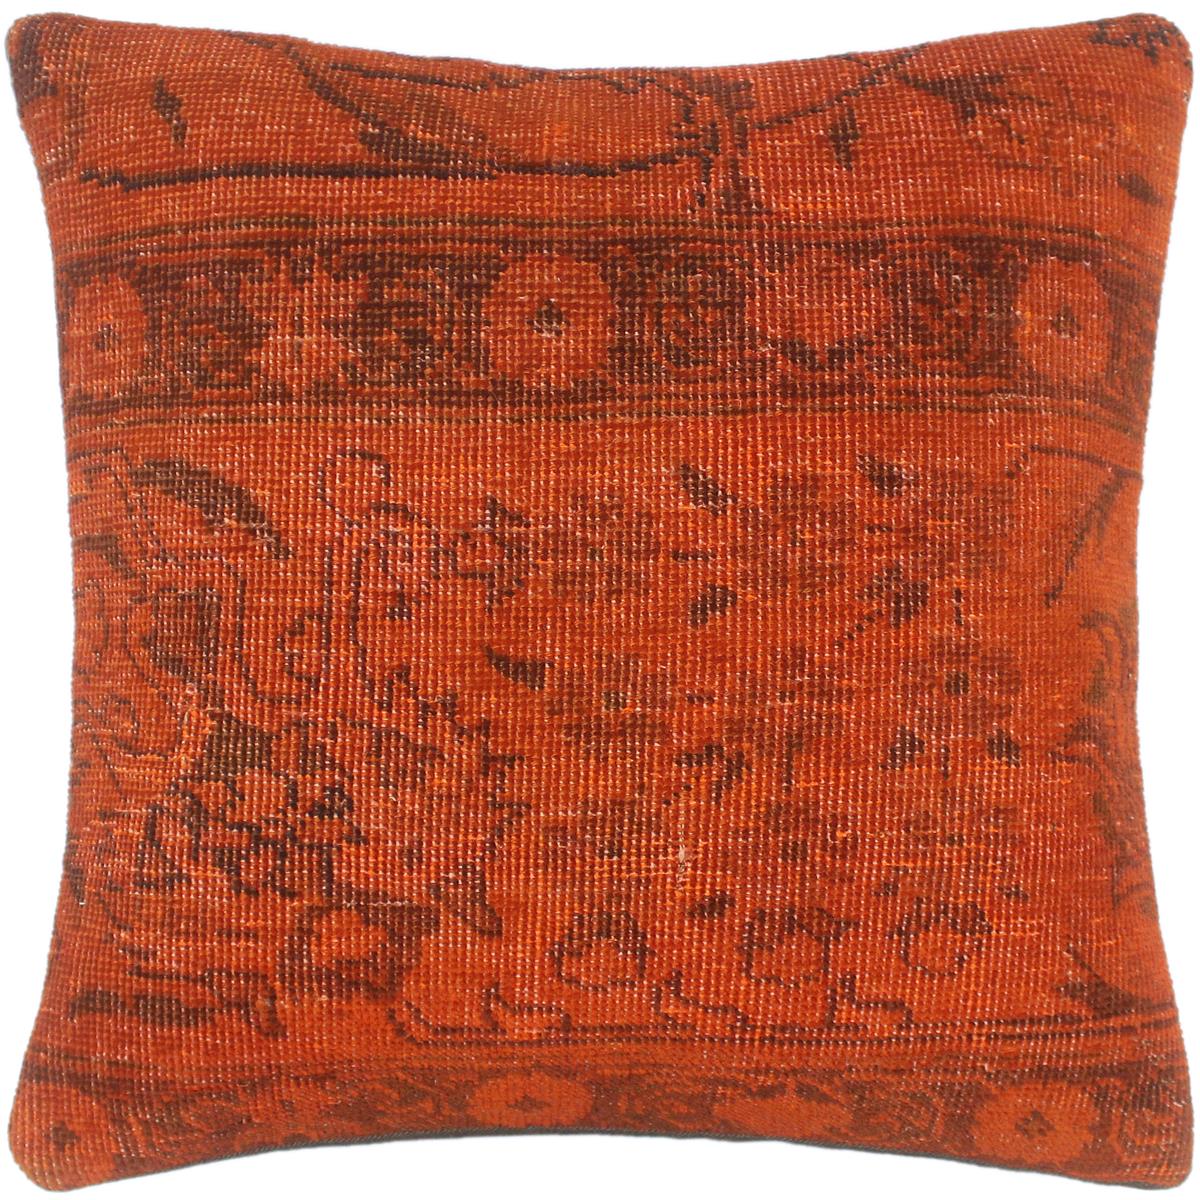 handmade Vintage Pillow Rust Brown Hand-Woven SQUARE 100% WOOL Vintage Pillow